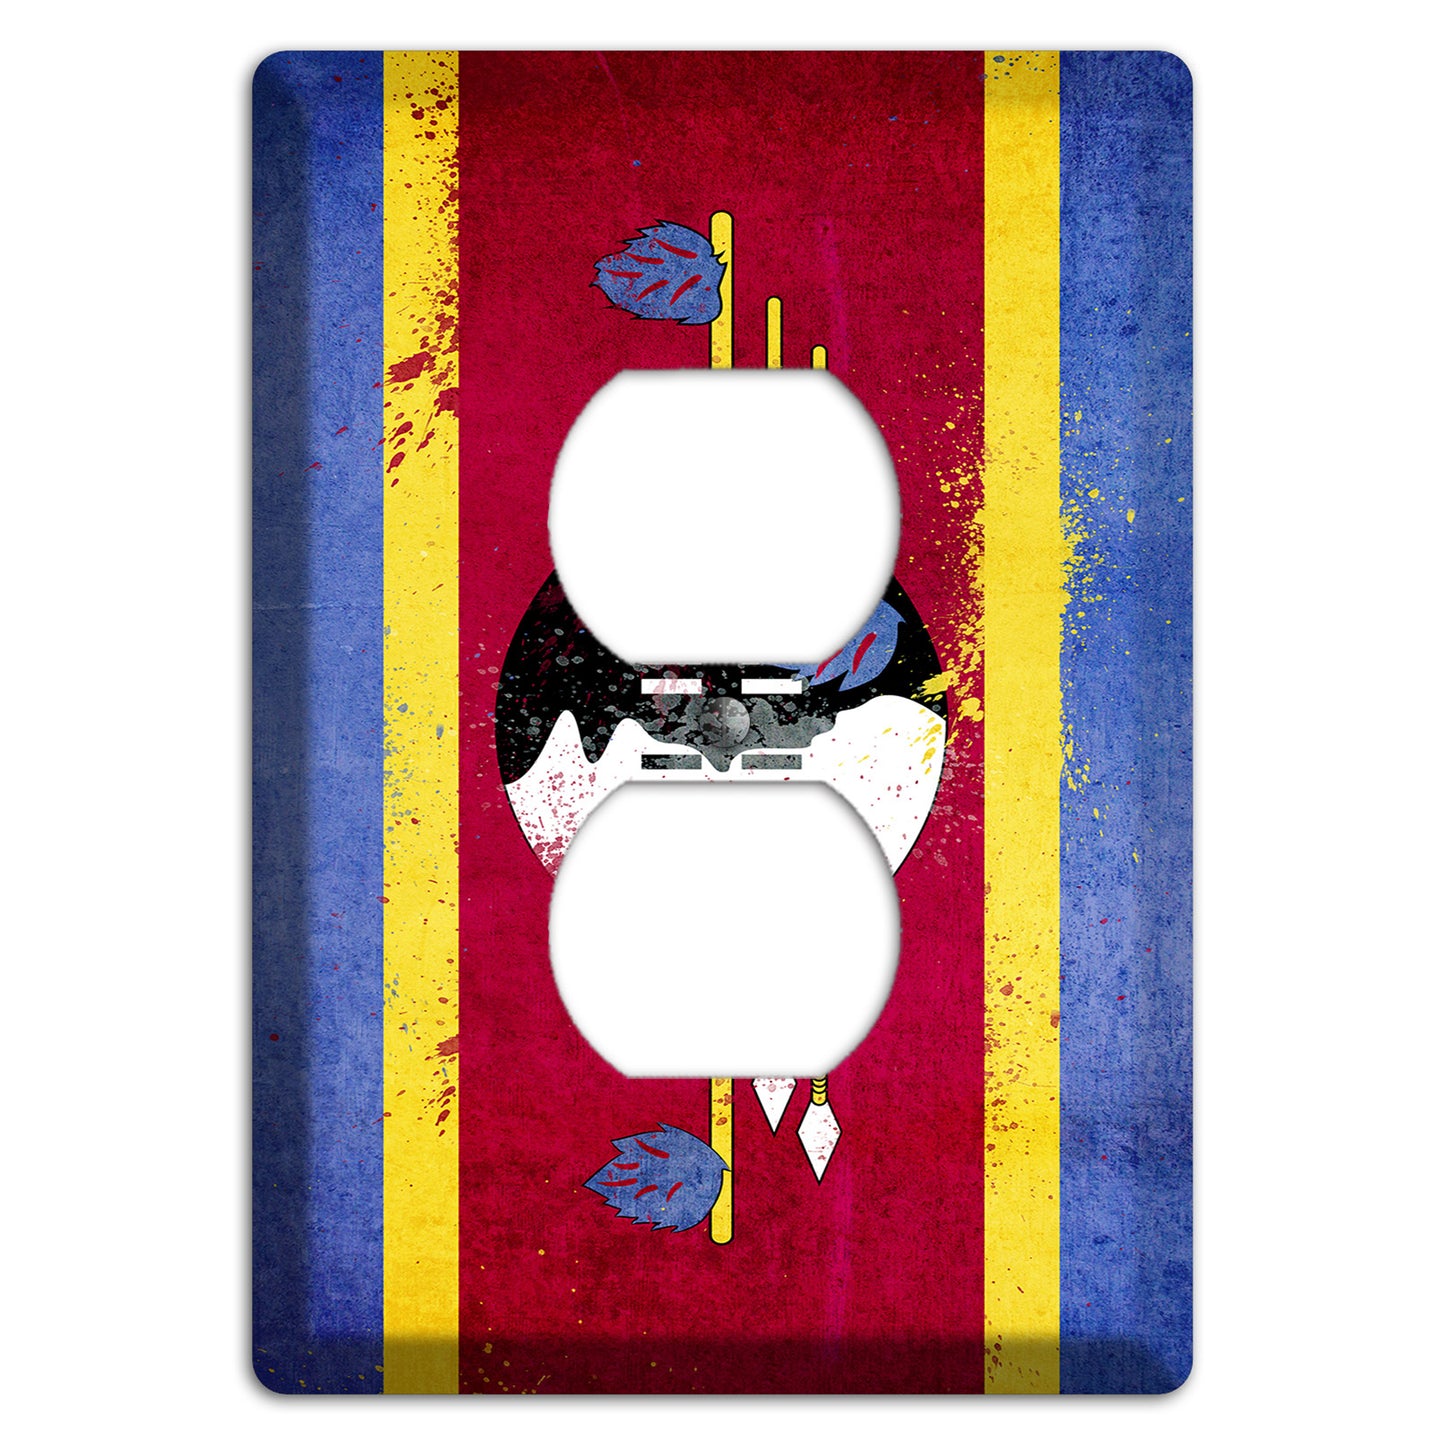 Swaziland Cover Plates Duplex Outlet Wallplate